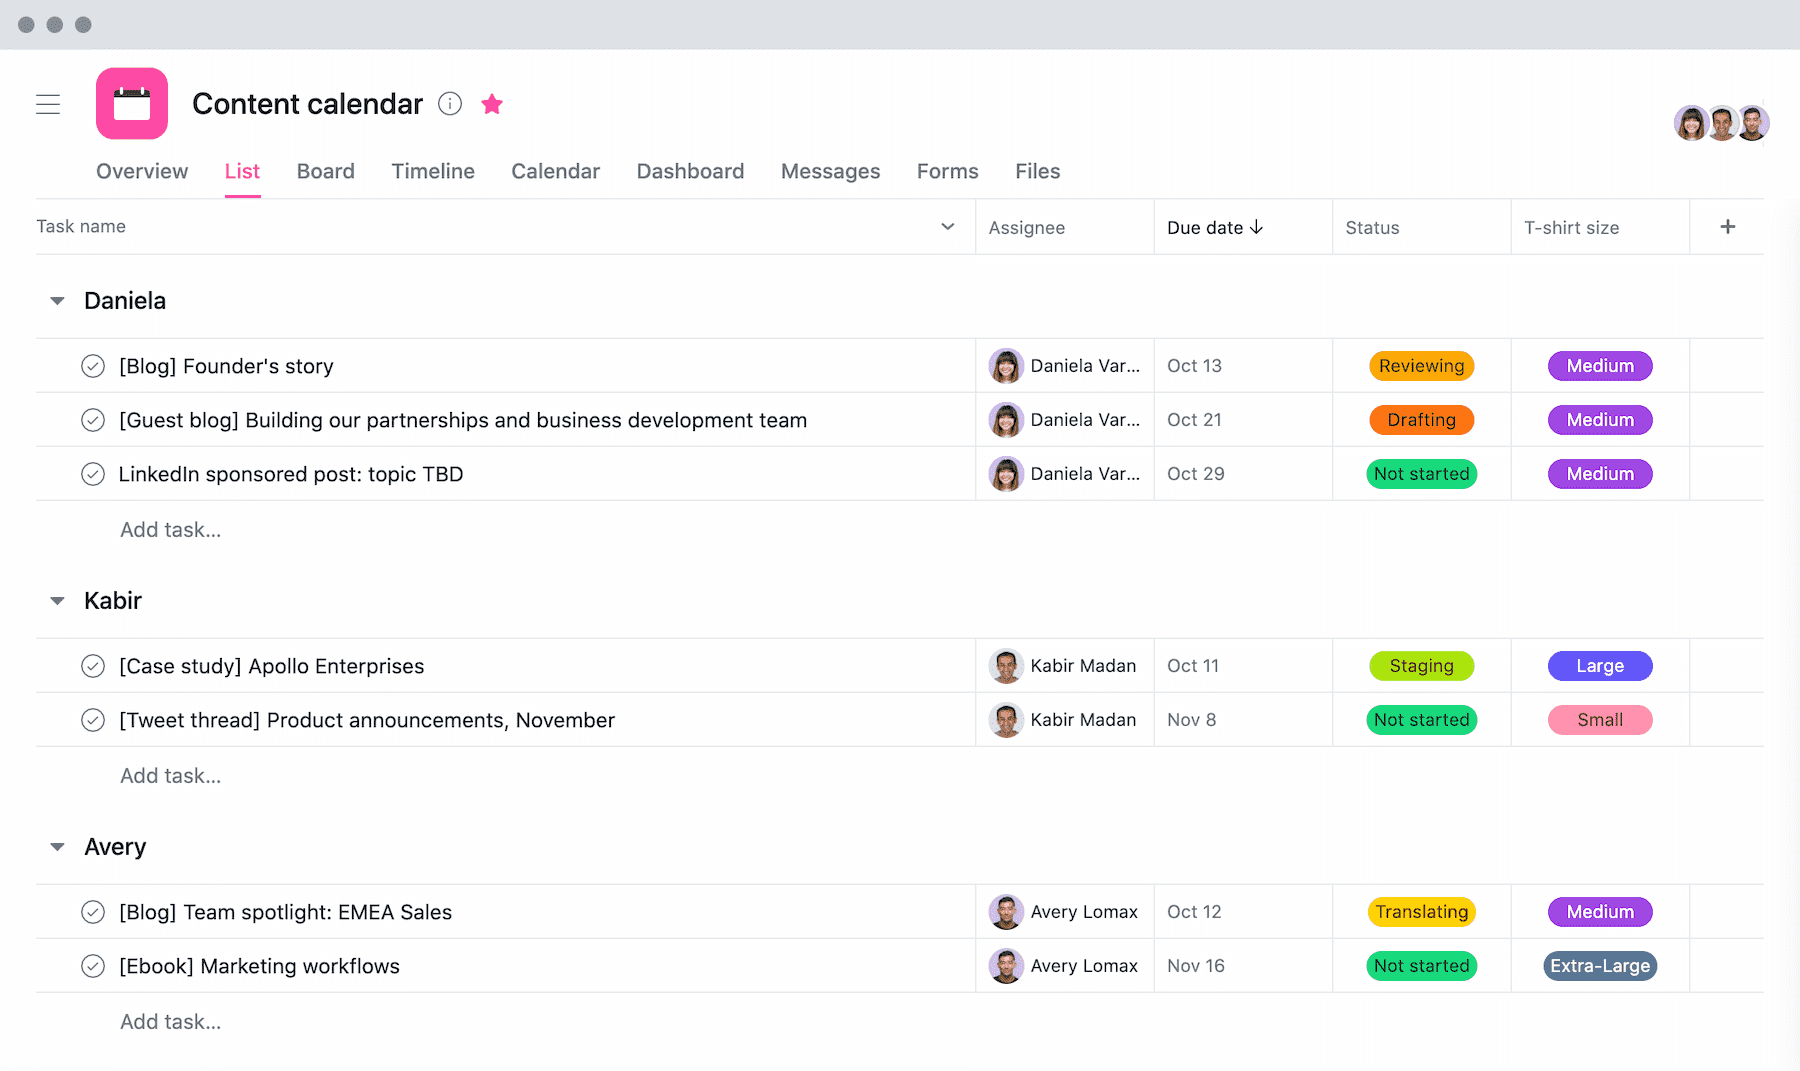 [List View] Content calendar project with t-shirt sizing in Asana